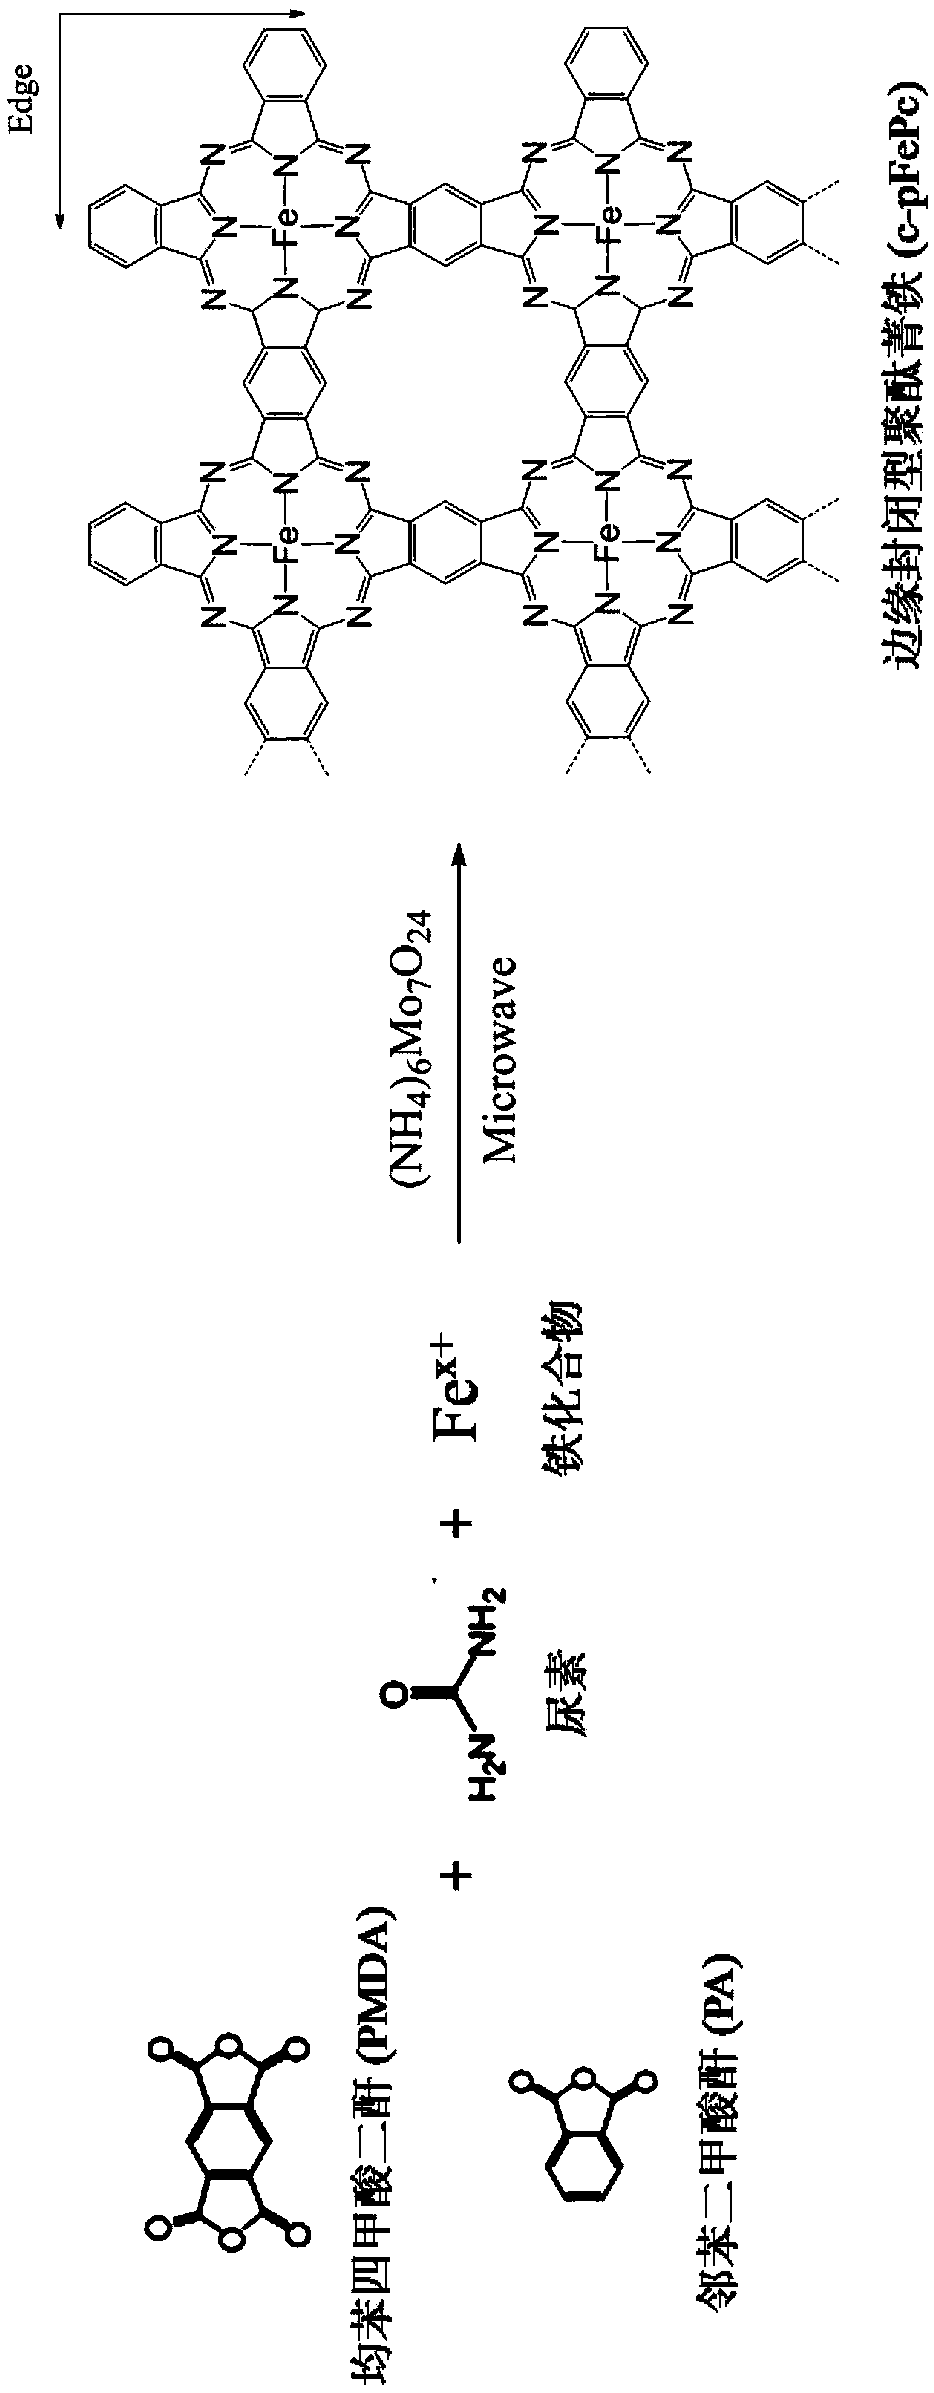 Core shell carbon nano-structure electrocatalyst with high catalytic performance and preparation method thereof